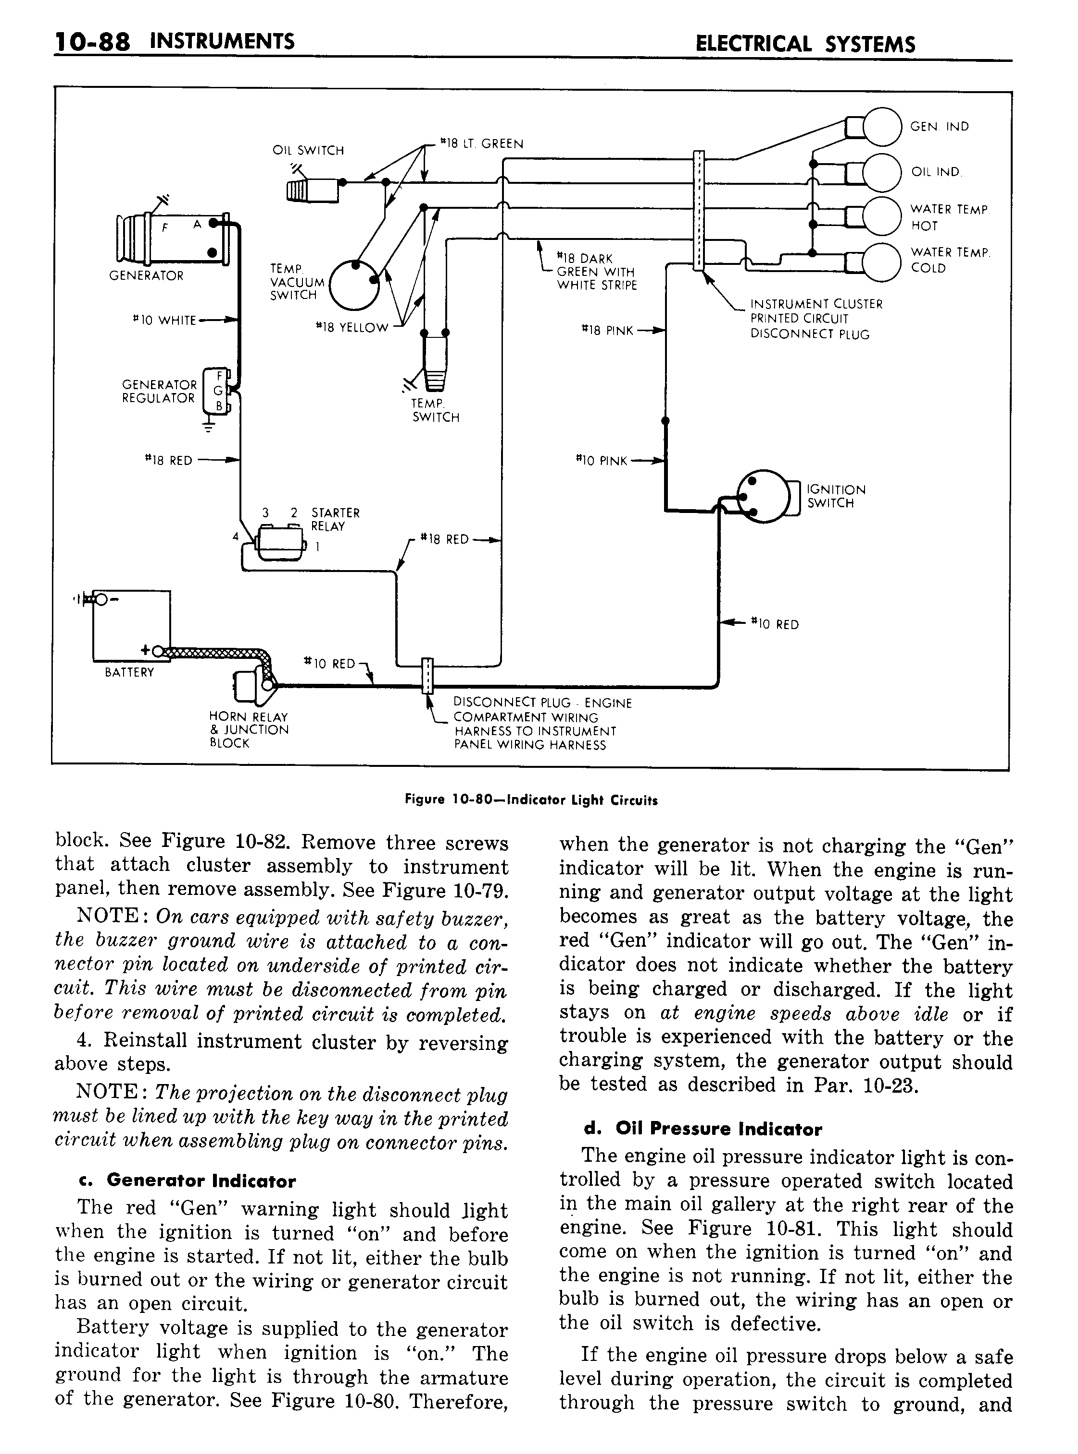 n_11 1960 Buick Shop Manual - Electrical Systems-088-088.jpg